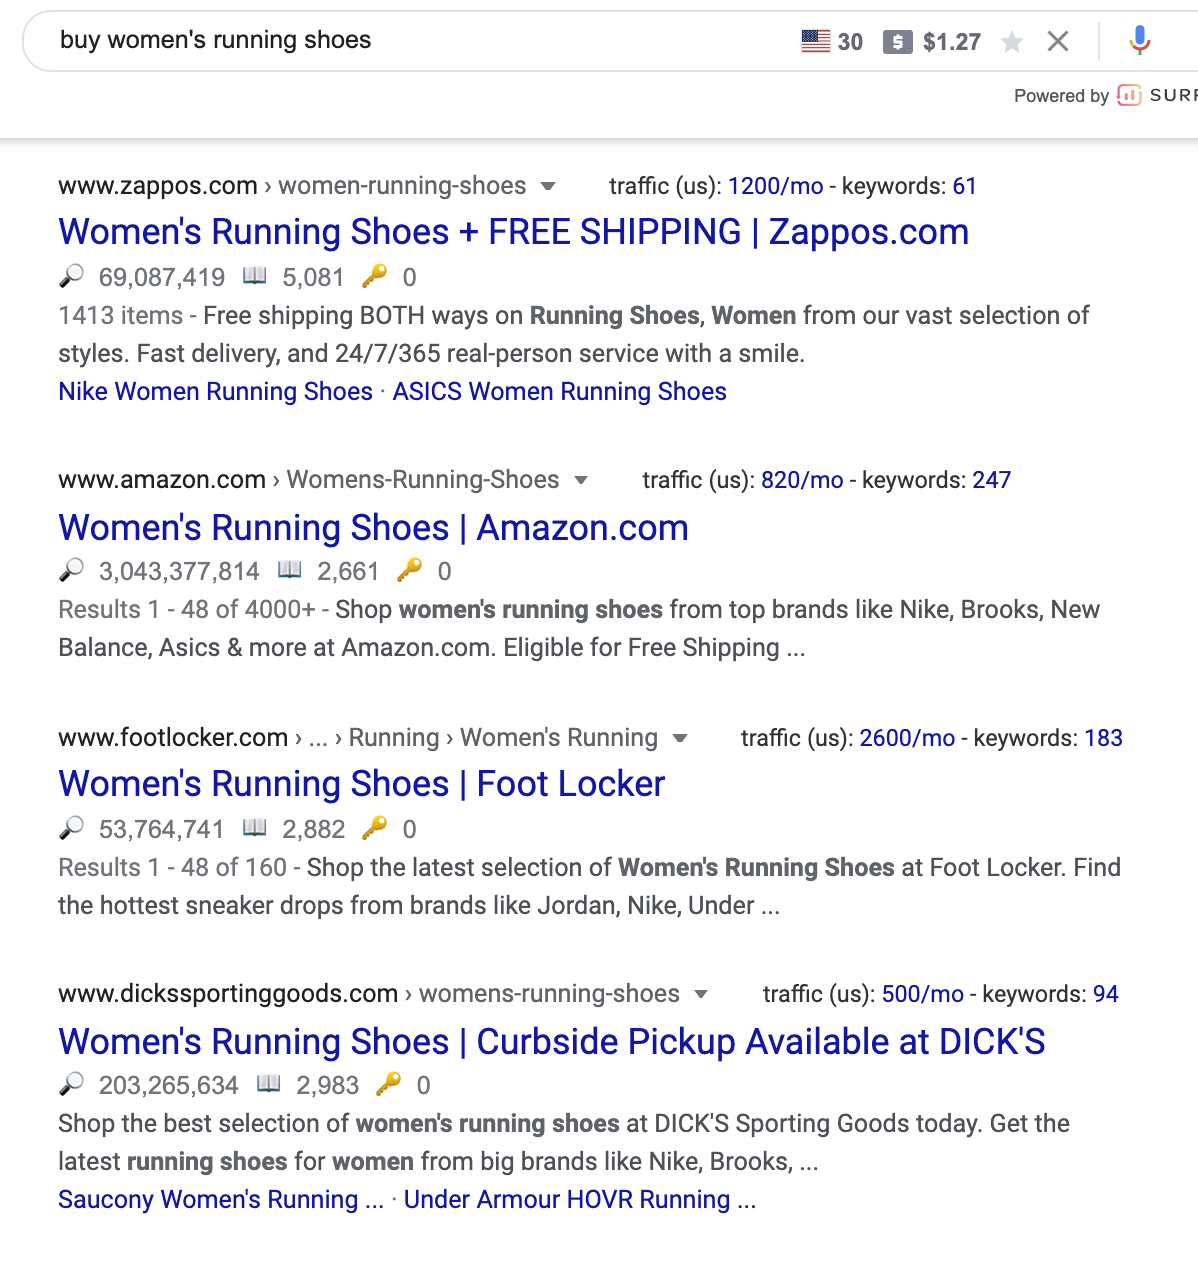 google search results for buy womens running shoes shows website product pages